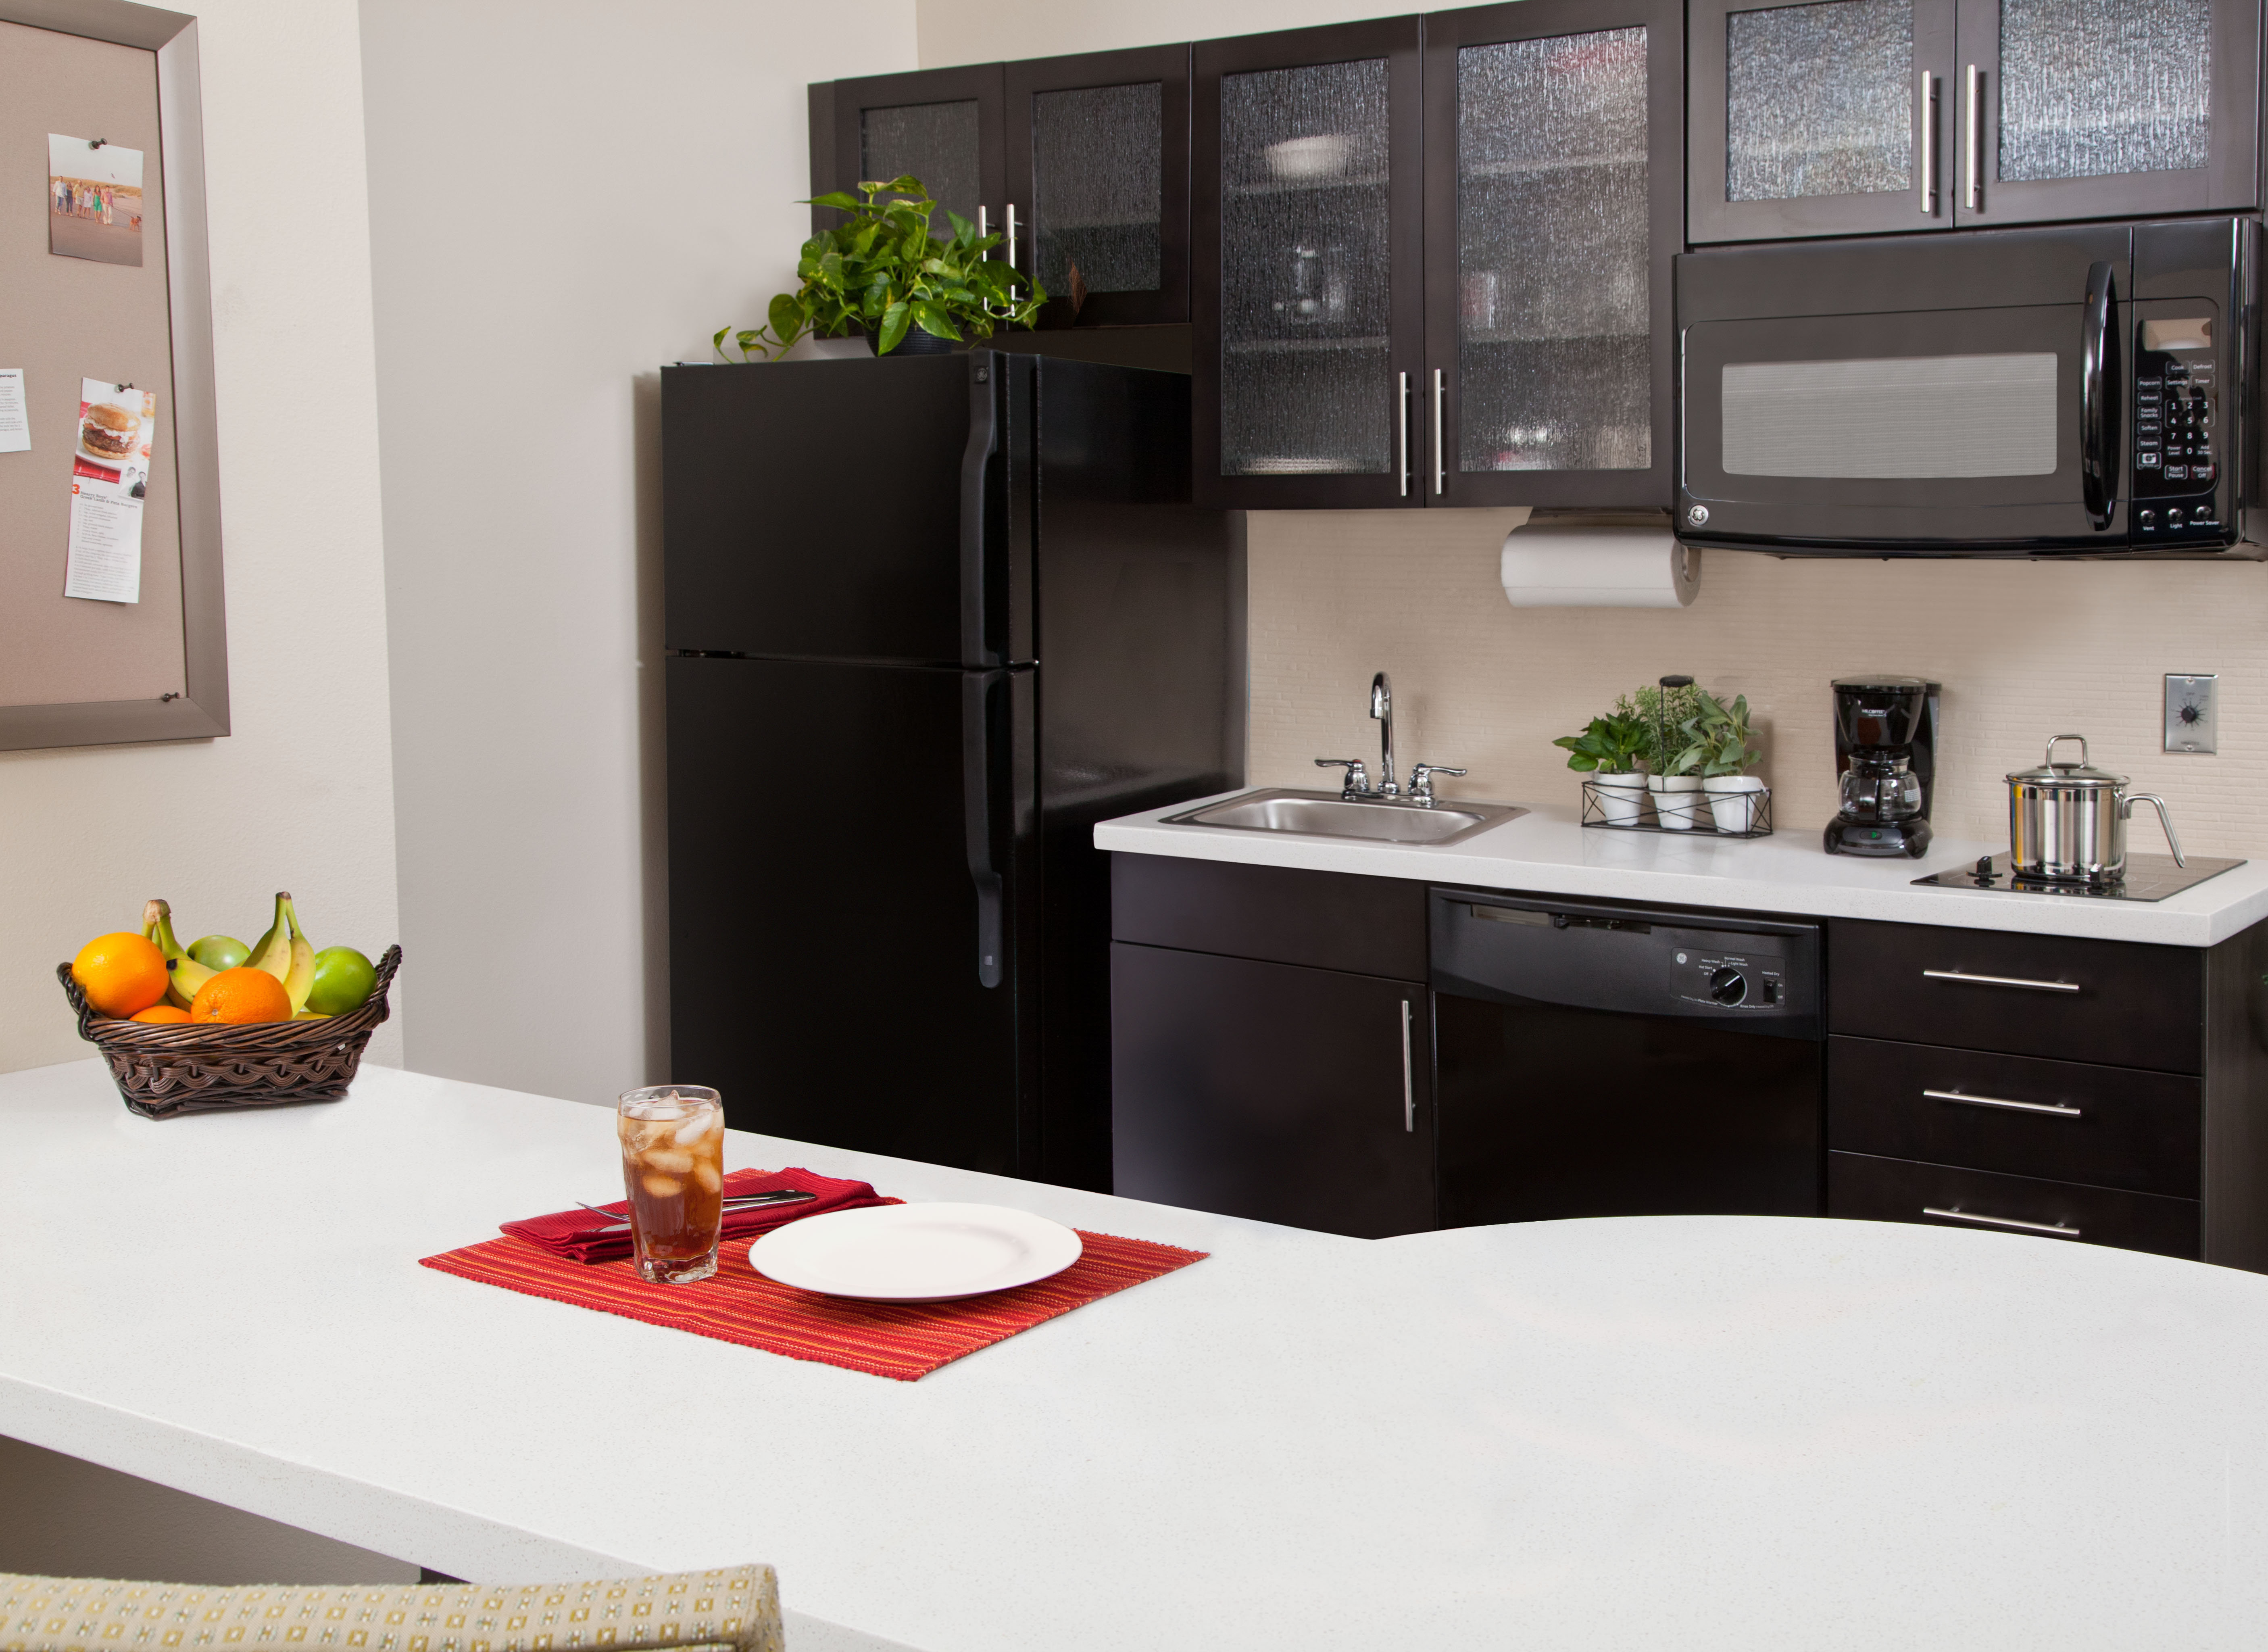 Each suite with a full kitchen and dining area.